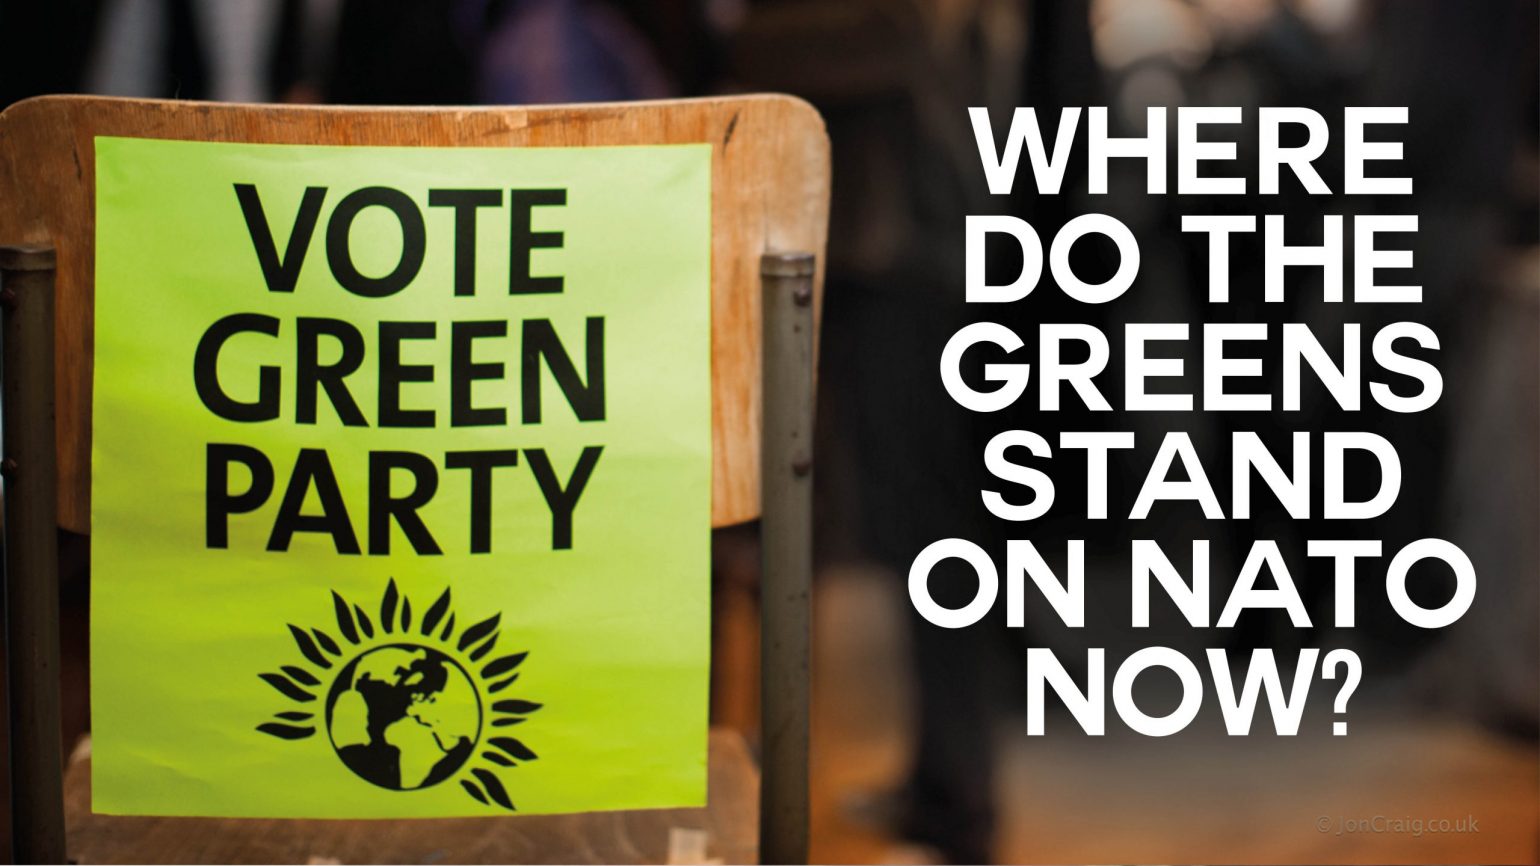 A photo of a poster on the back of a chair reading "Vote Green Party". There is text overlaid reading "Where do the Greens stand on NATO now?"